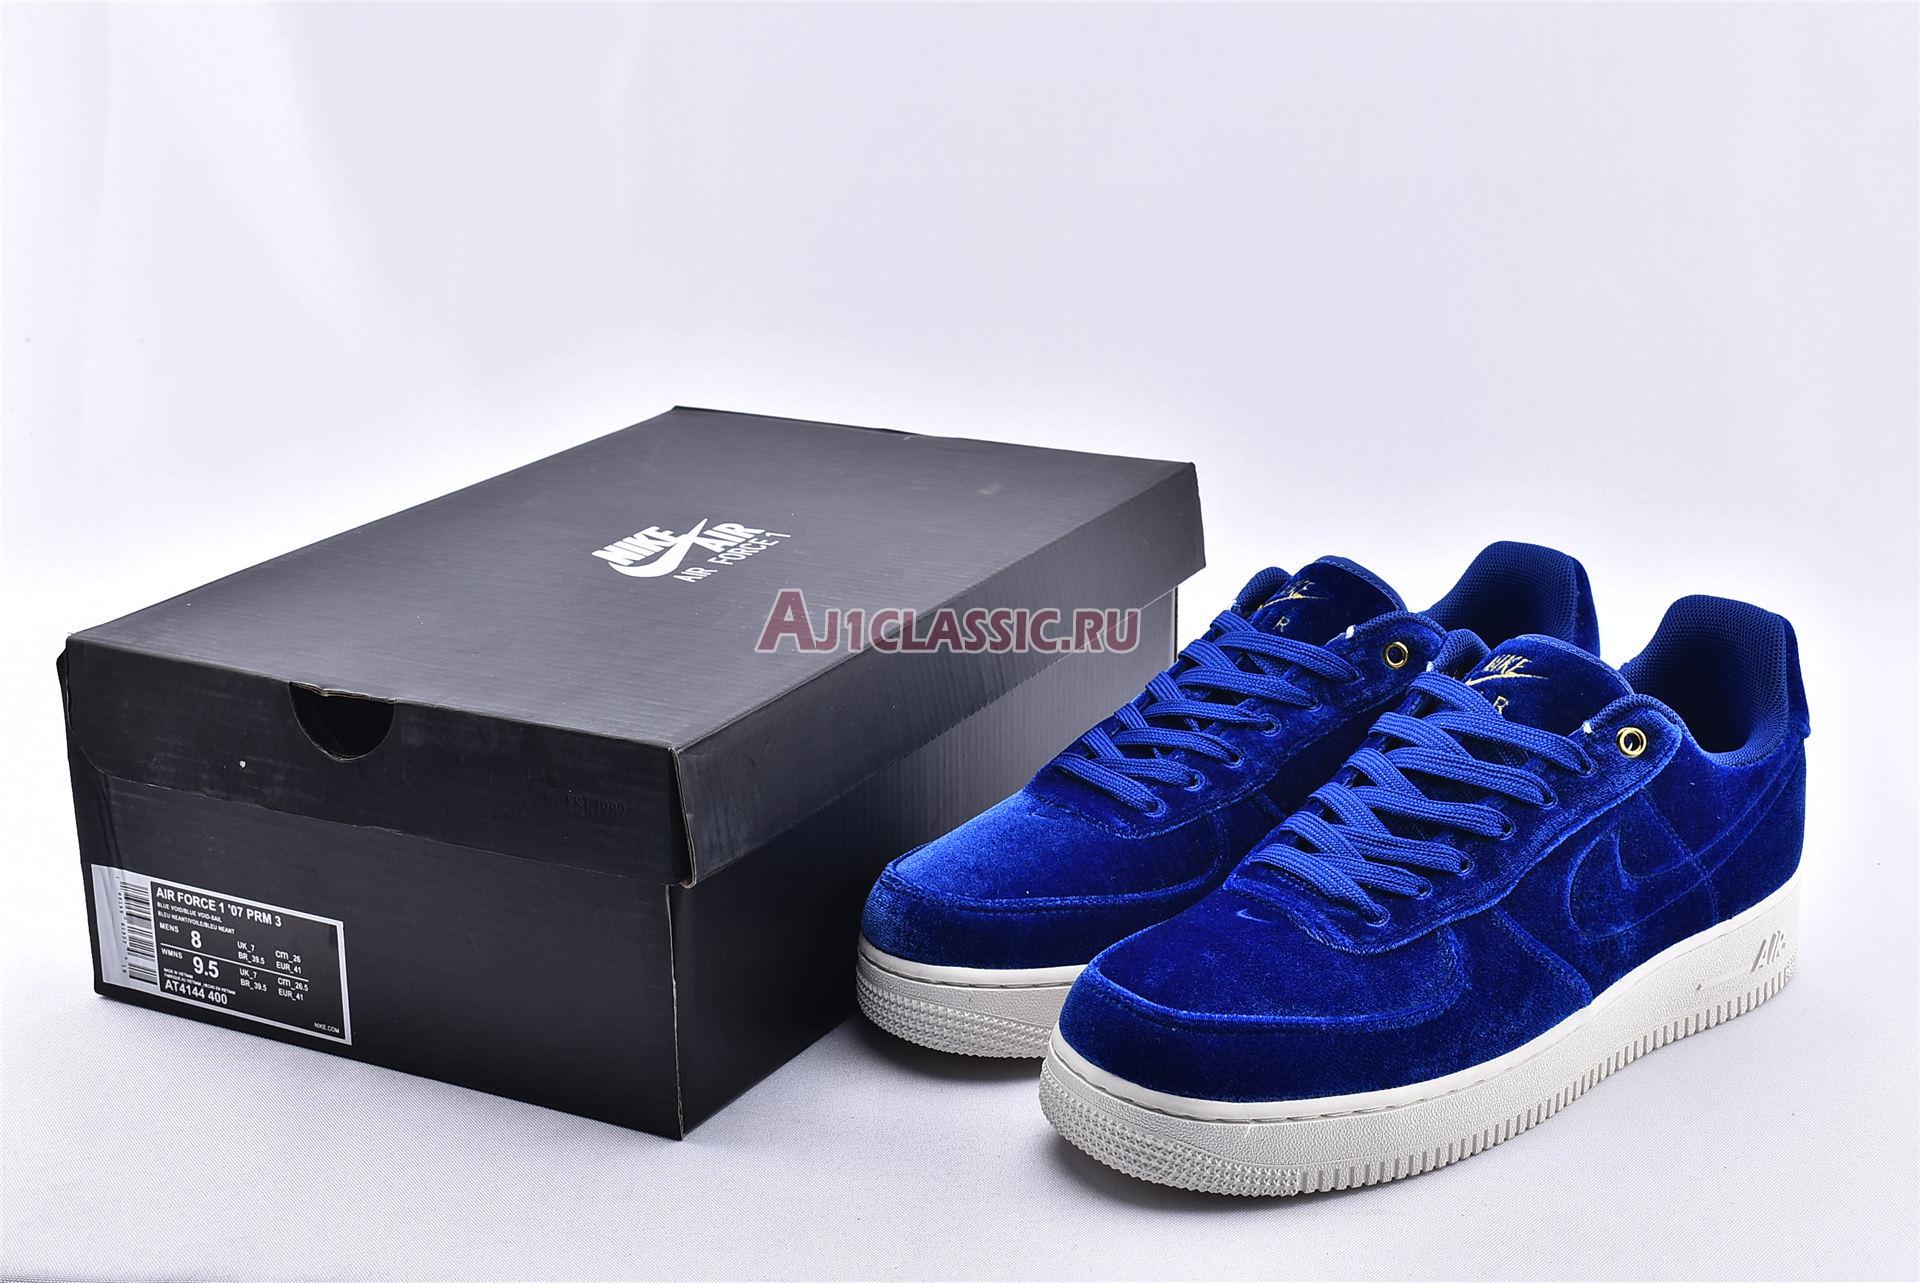 Nike Air Force 1 Low 07 Premium Blue Void AT4144-400 Blue Void/Blue Void-Sail-Metallic Gold Sneakers